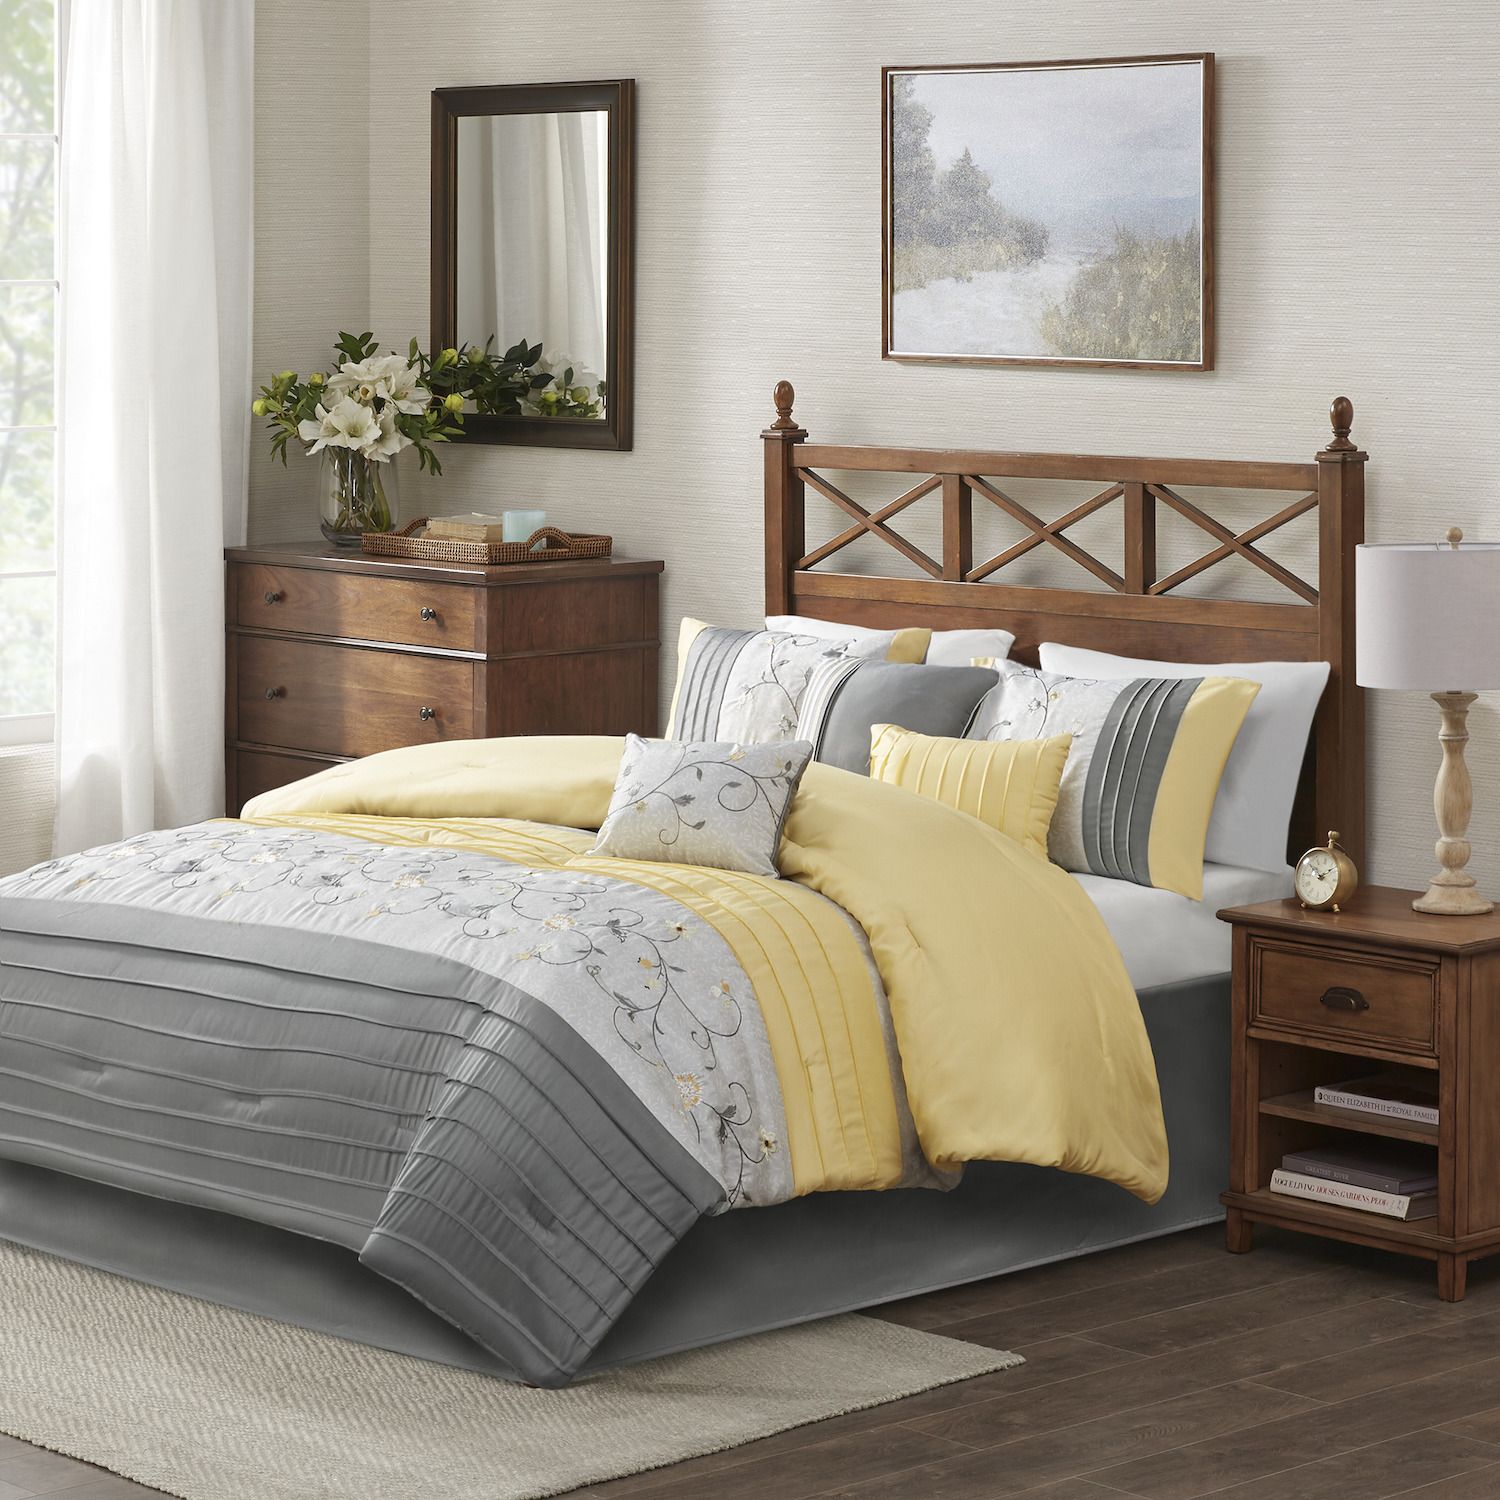 yellow quilts and comforters